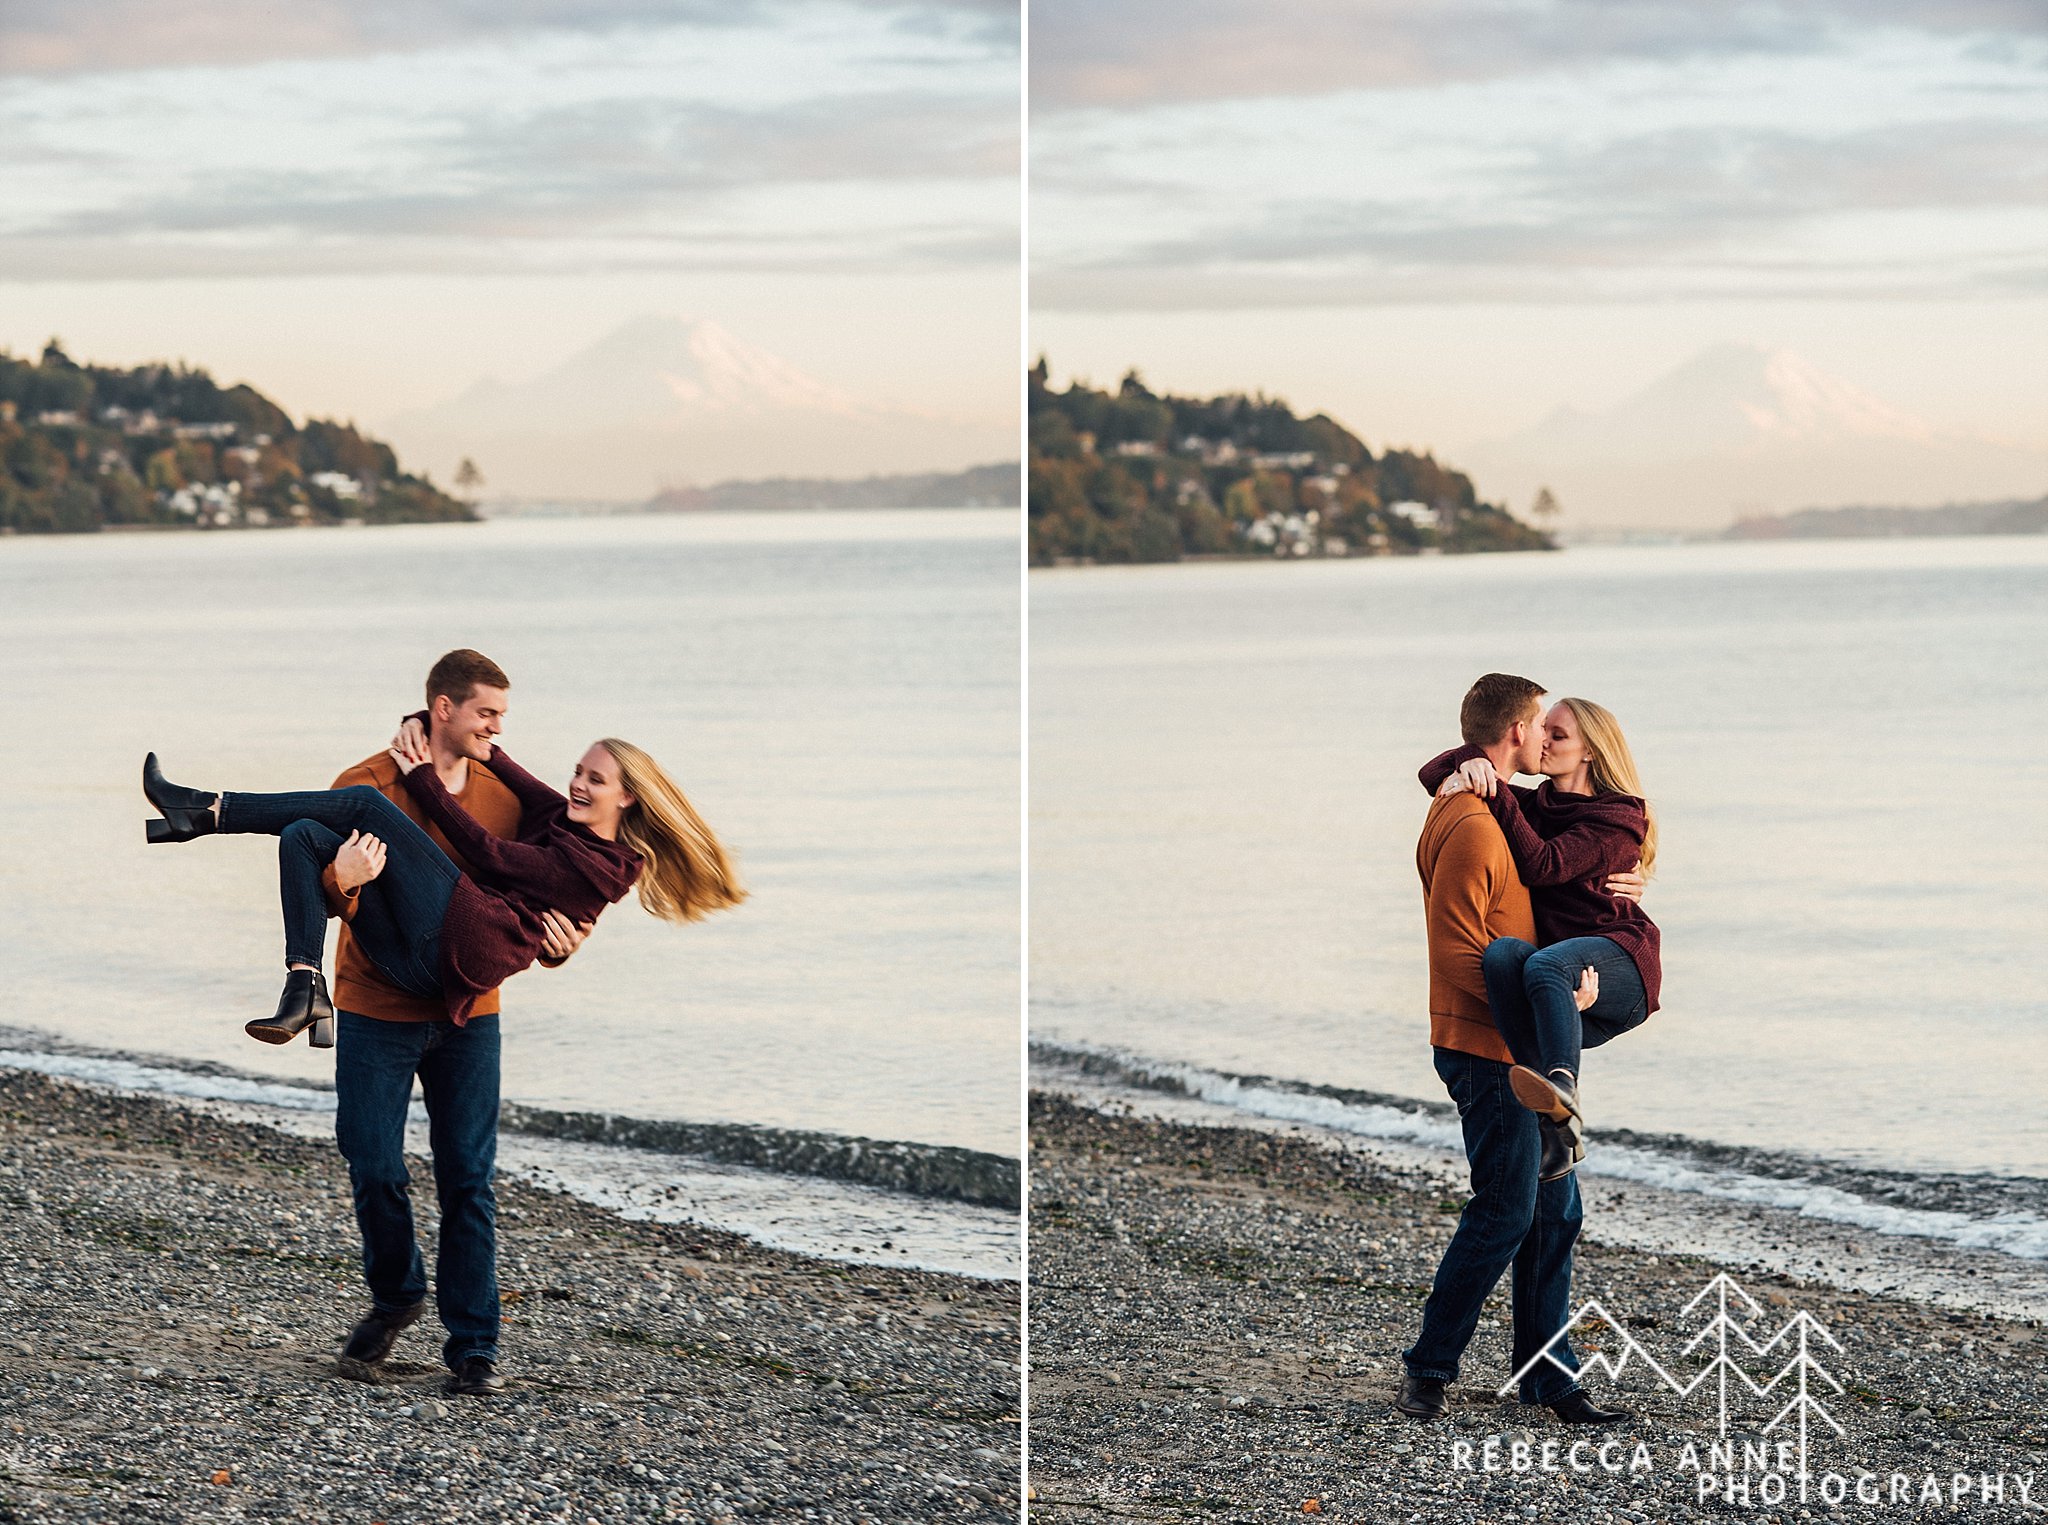 Discovery Park Engagement,Seattle engagement photographer,Seattle engagement Photography,washington engagement photographer,pacific northwest engagement photographer,tacoma engagement photographer,tacoma engagement photography,washington engagement photography,pacific northwest engagement photography,